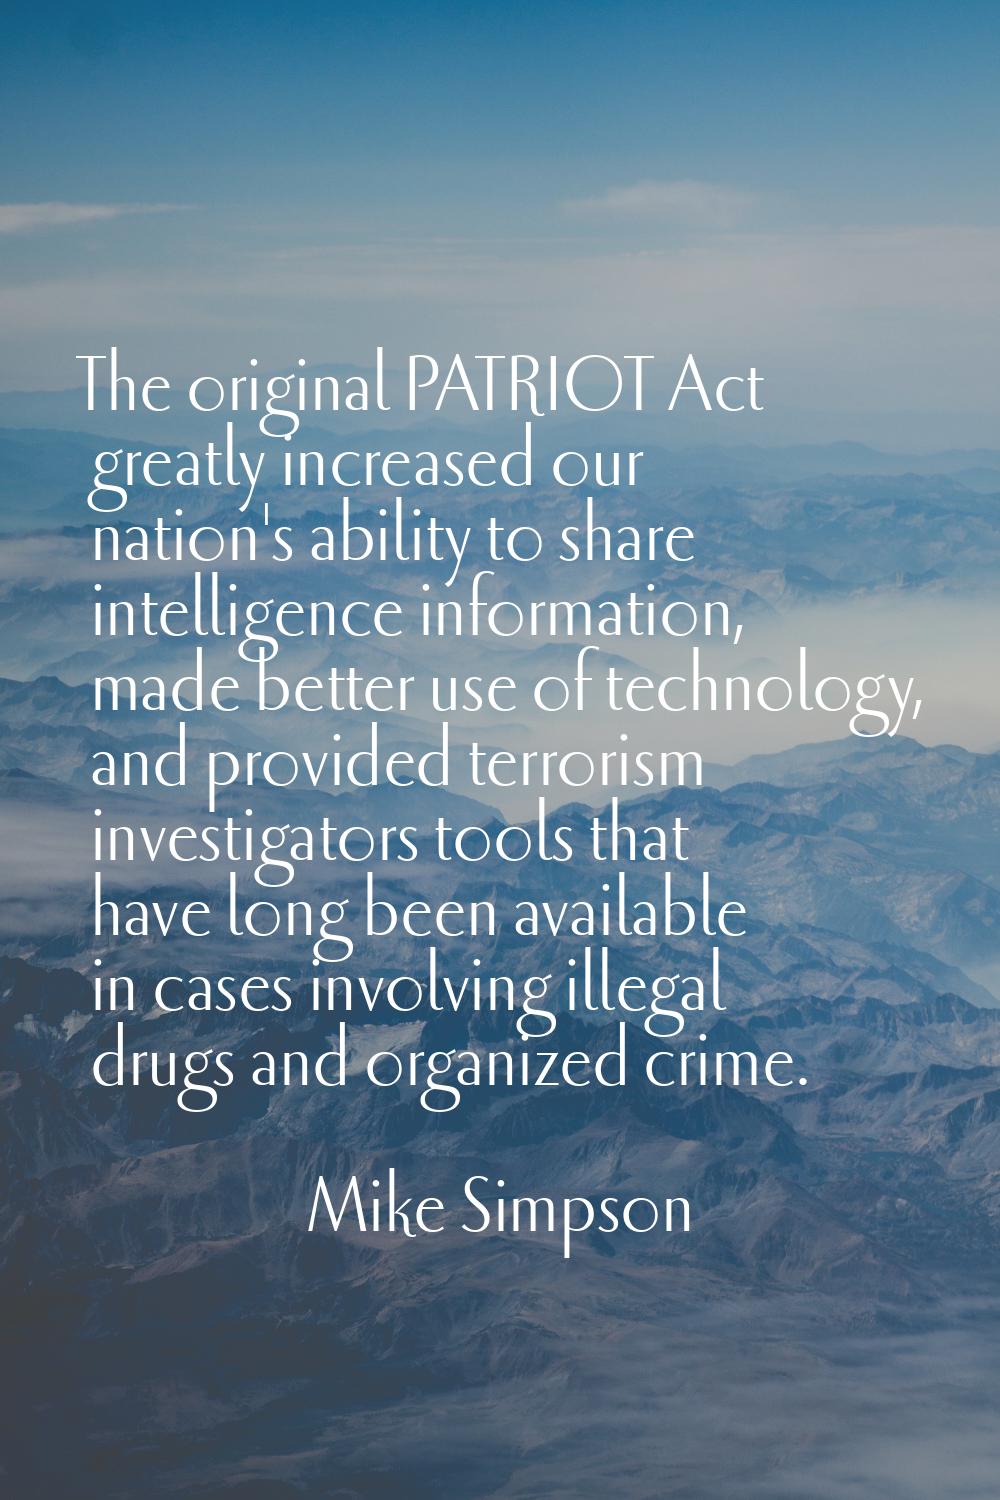 The original PATRIOT Act greatly increased our nation's ability to share intelligence information, 